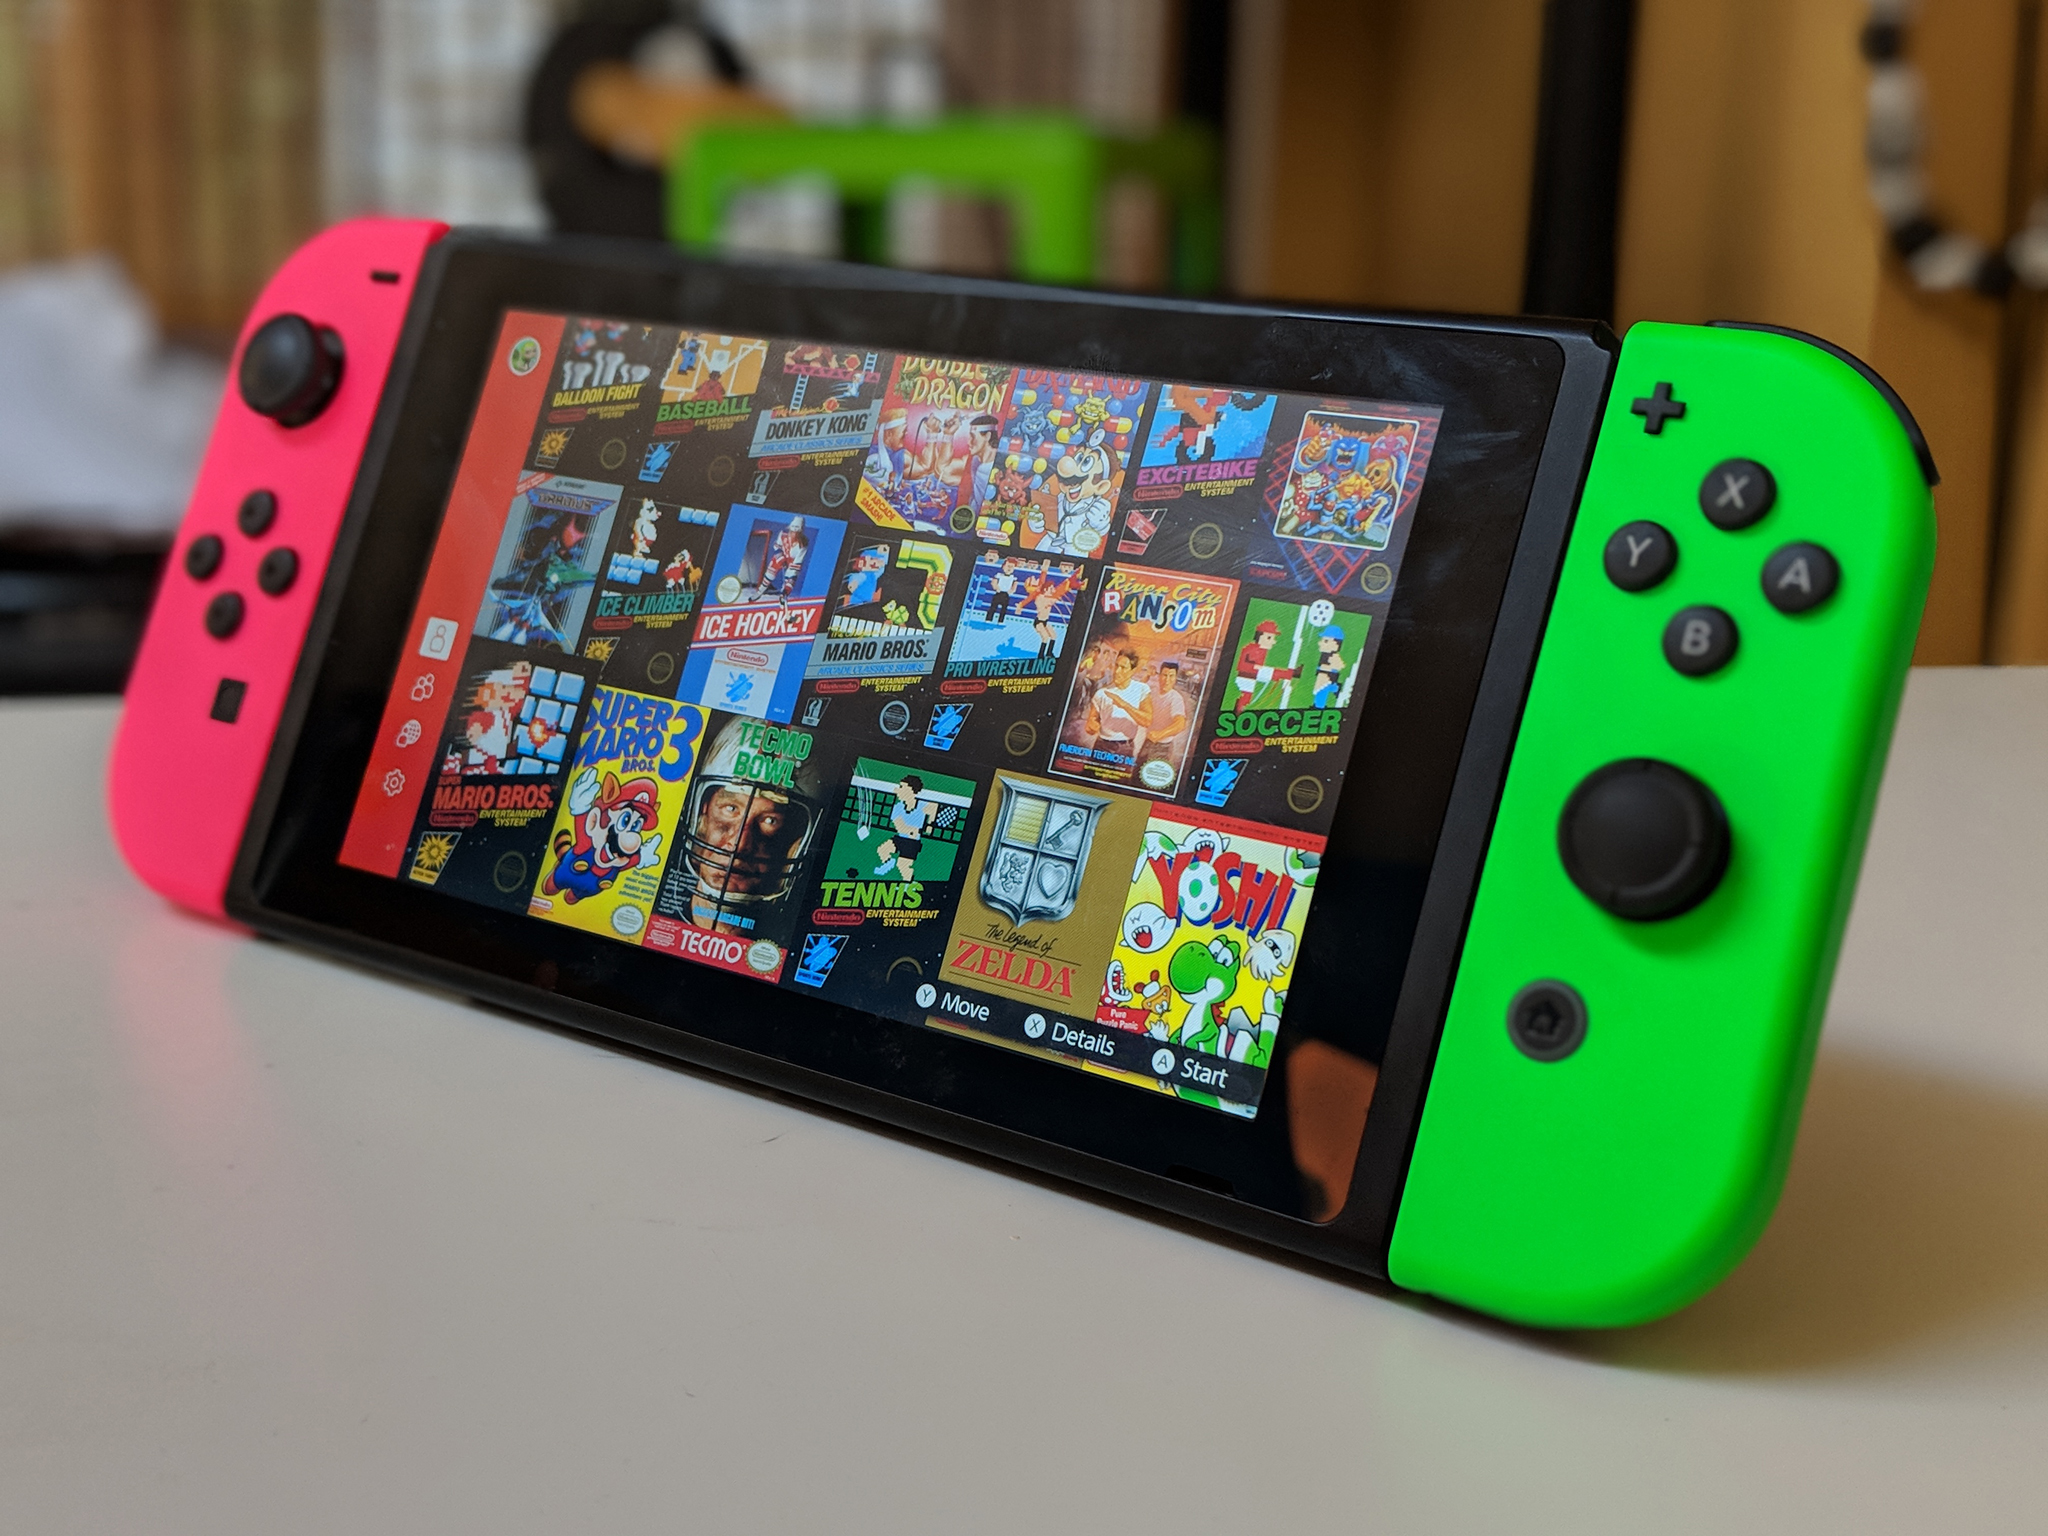 protein skål Skuldre på skuldrene How to play NES games online with friends on your Nintendo Switch | iMore